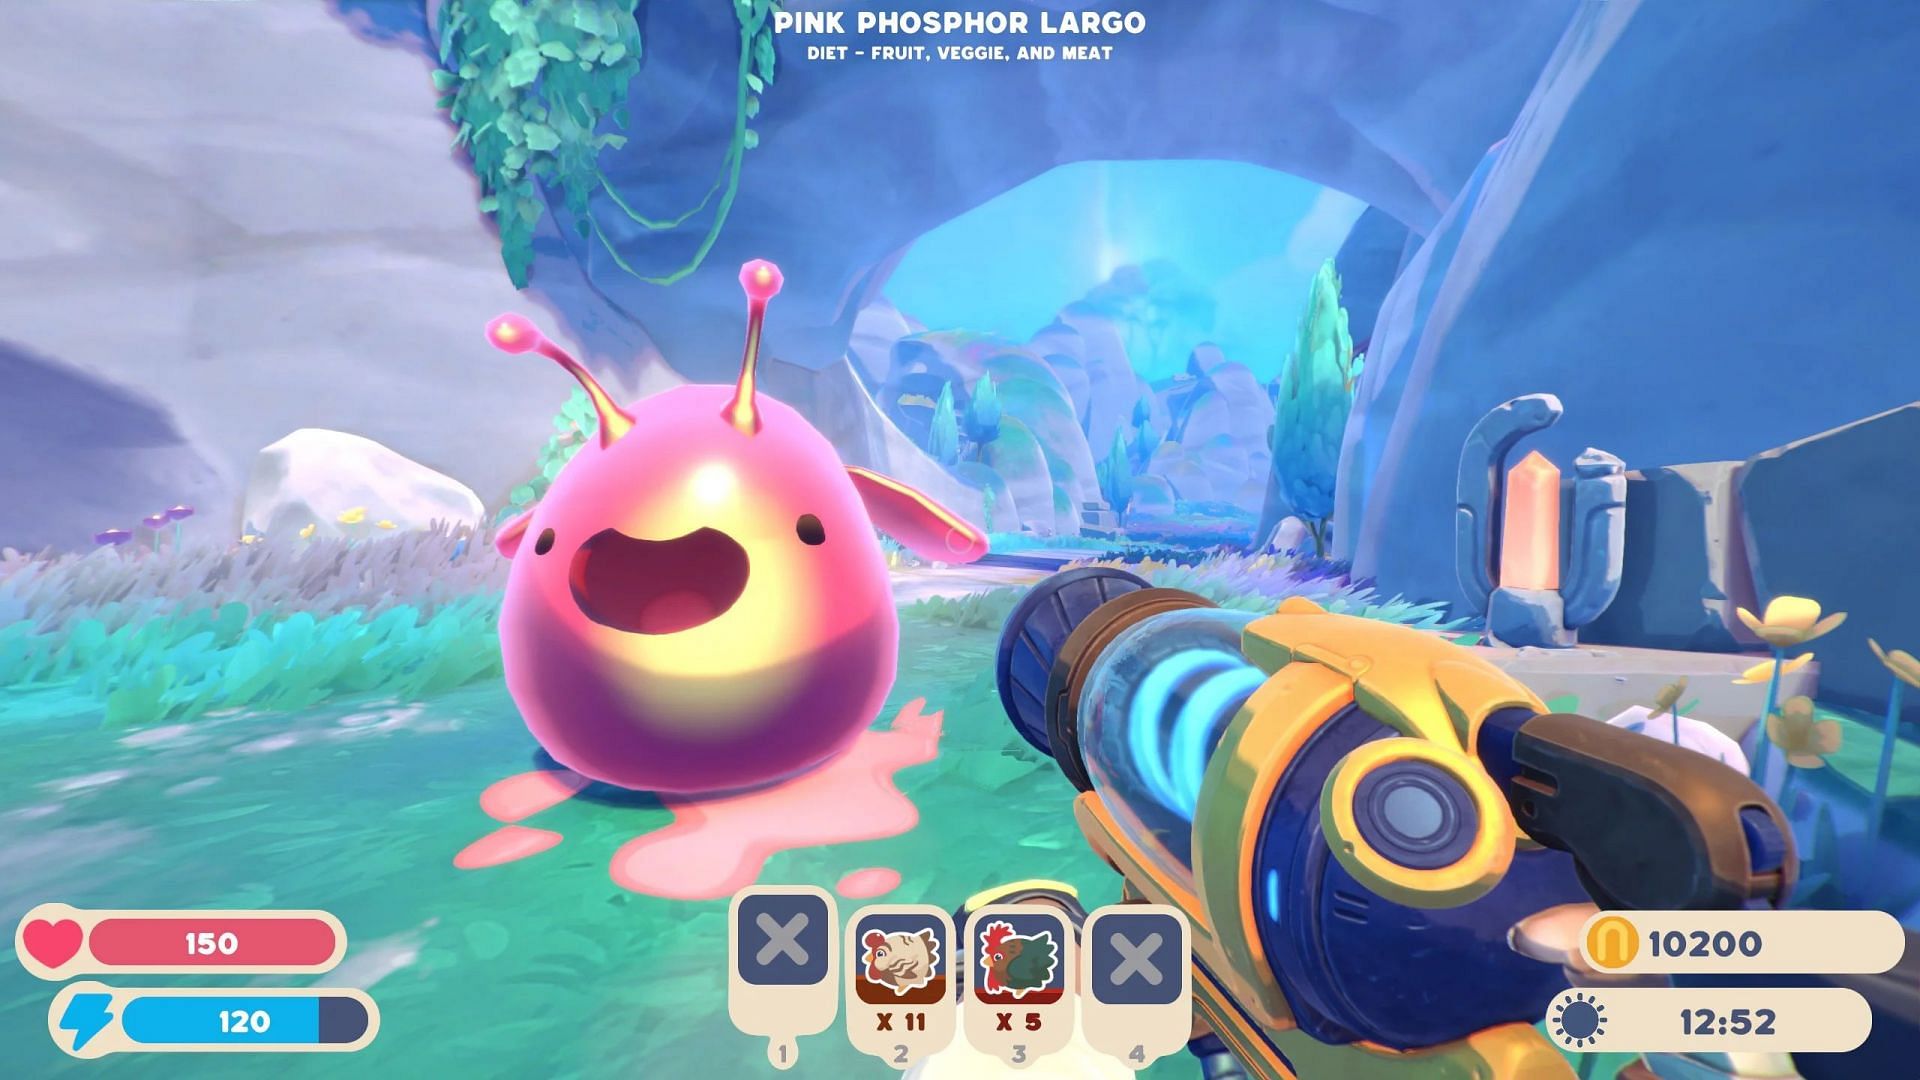 Like the original game, this Largo consists of two of the most common Slimes to be found (Image via Monomi Park)